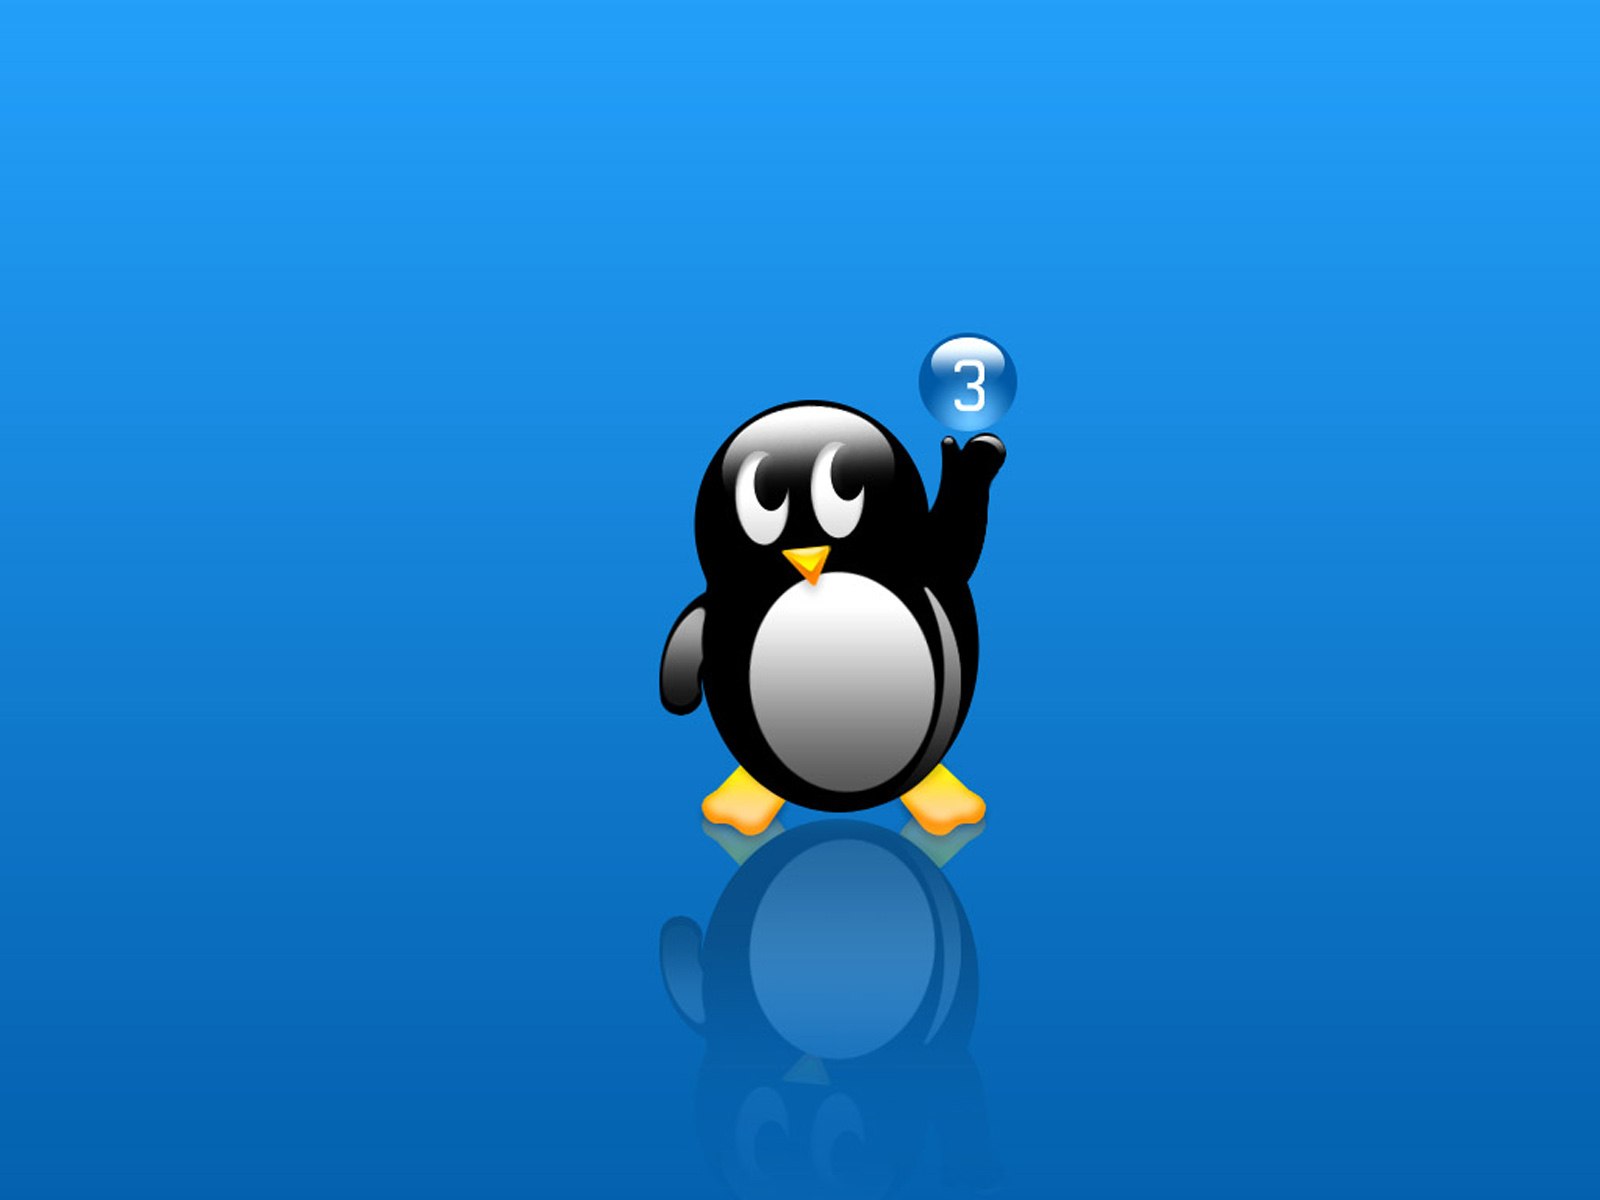 Background Wallpaper Linux Themes High Quality